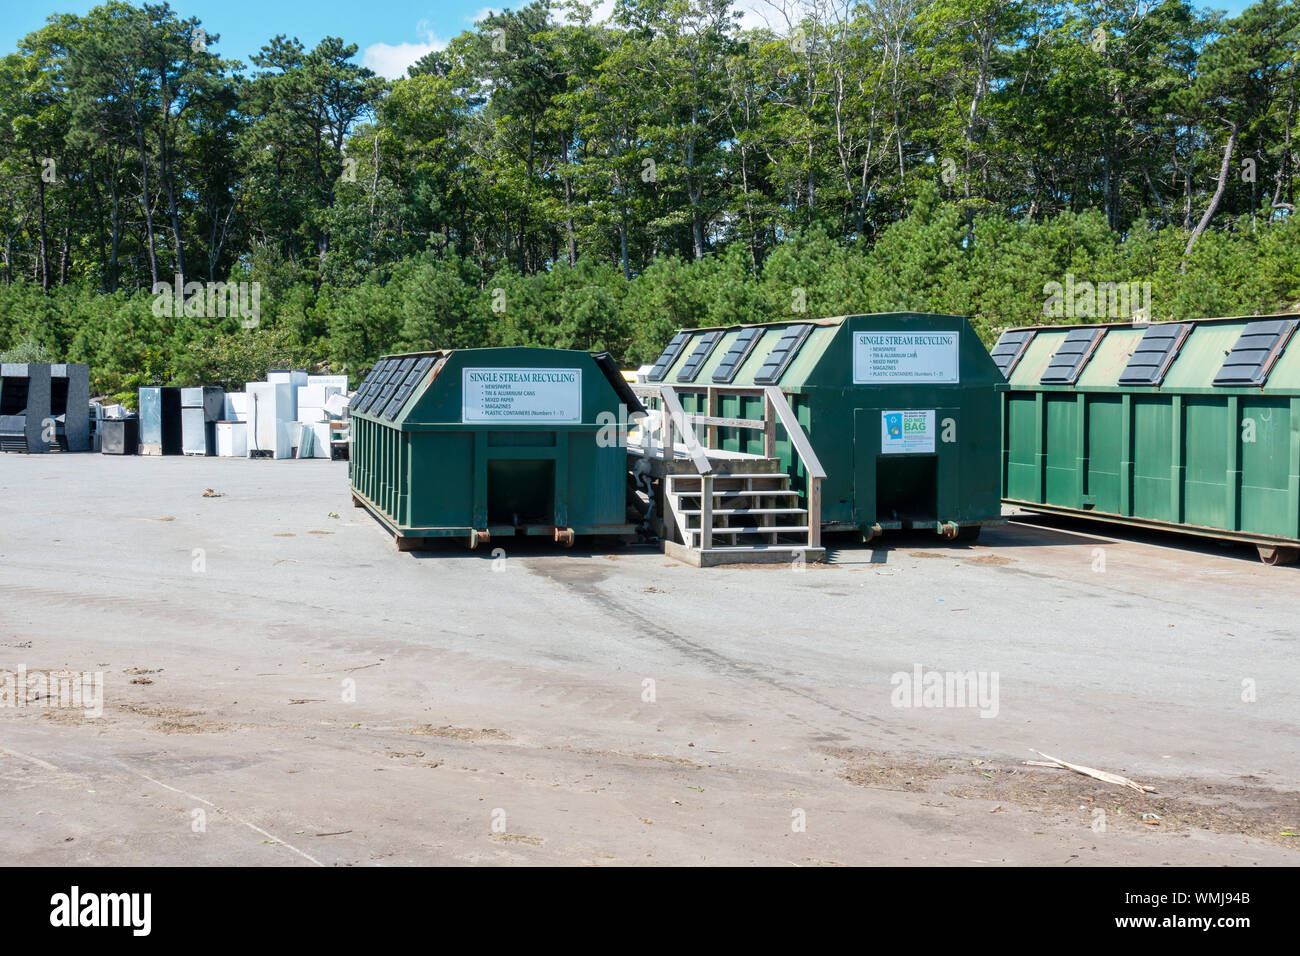 Single stream recycling containers at landfill with appliances incl. refridgerators beyond Stock Photo